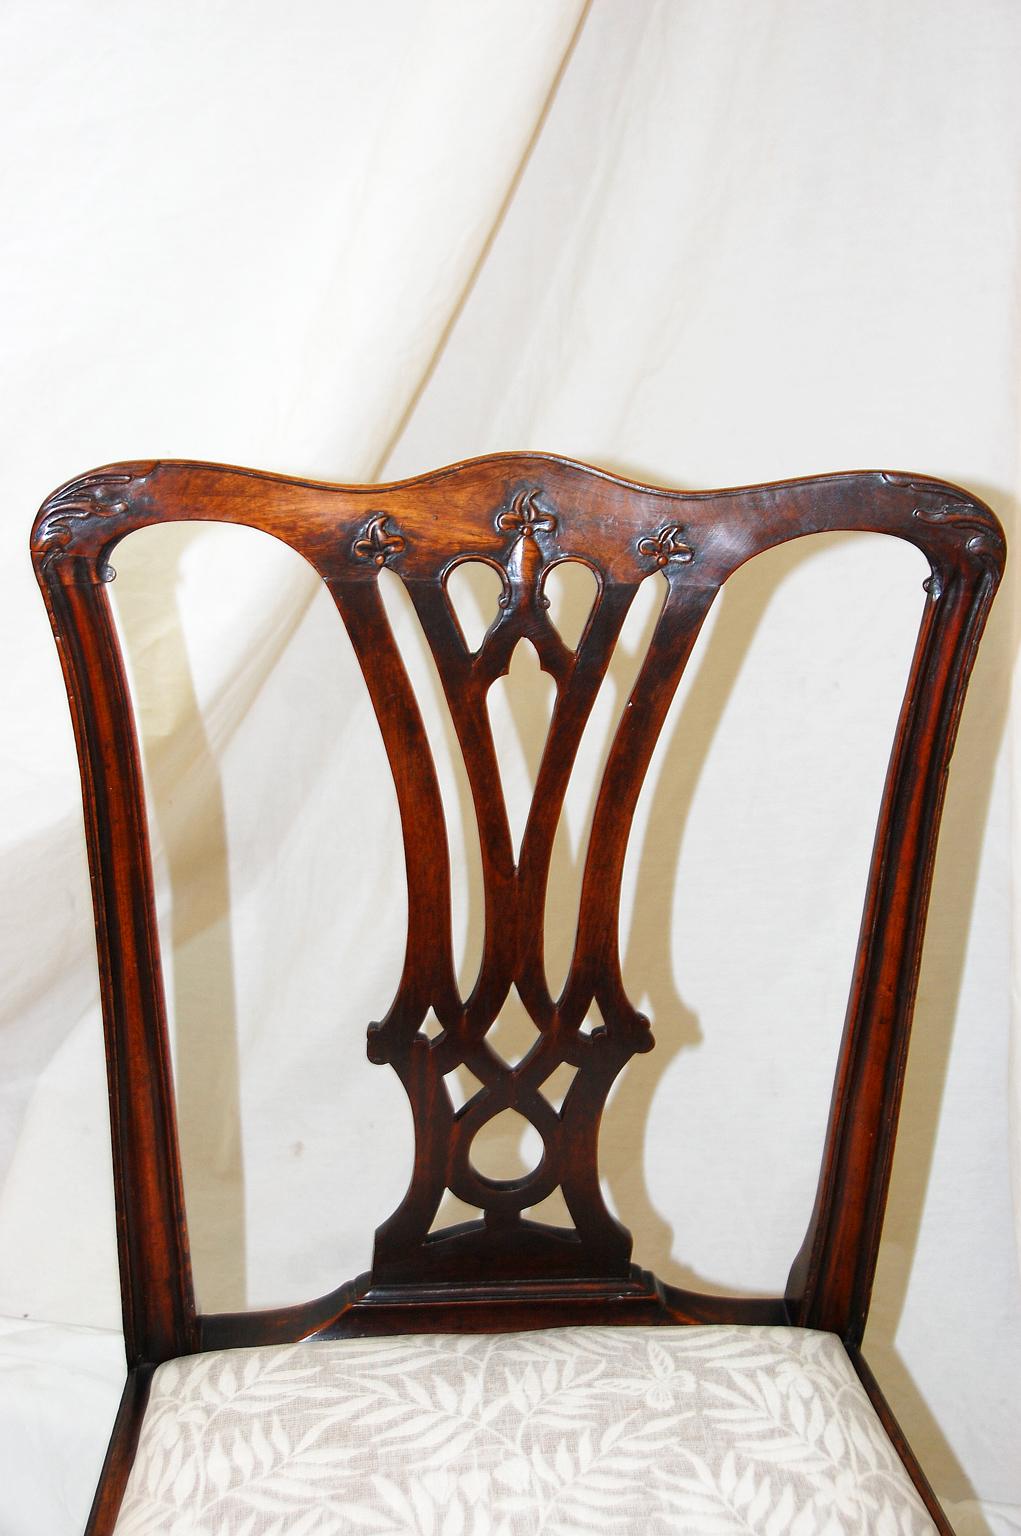 English Georgian Chippendale period pair of mahogany carved side chairs. The back top rail is carved with acanthus leaves to the corners and trefoil leaves in the center, the central splat is nicely pierced and the side uprights are molded. The